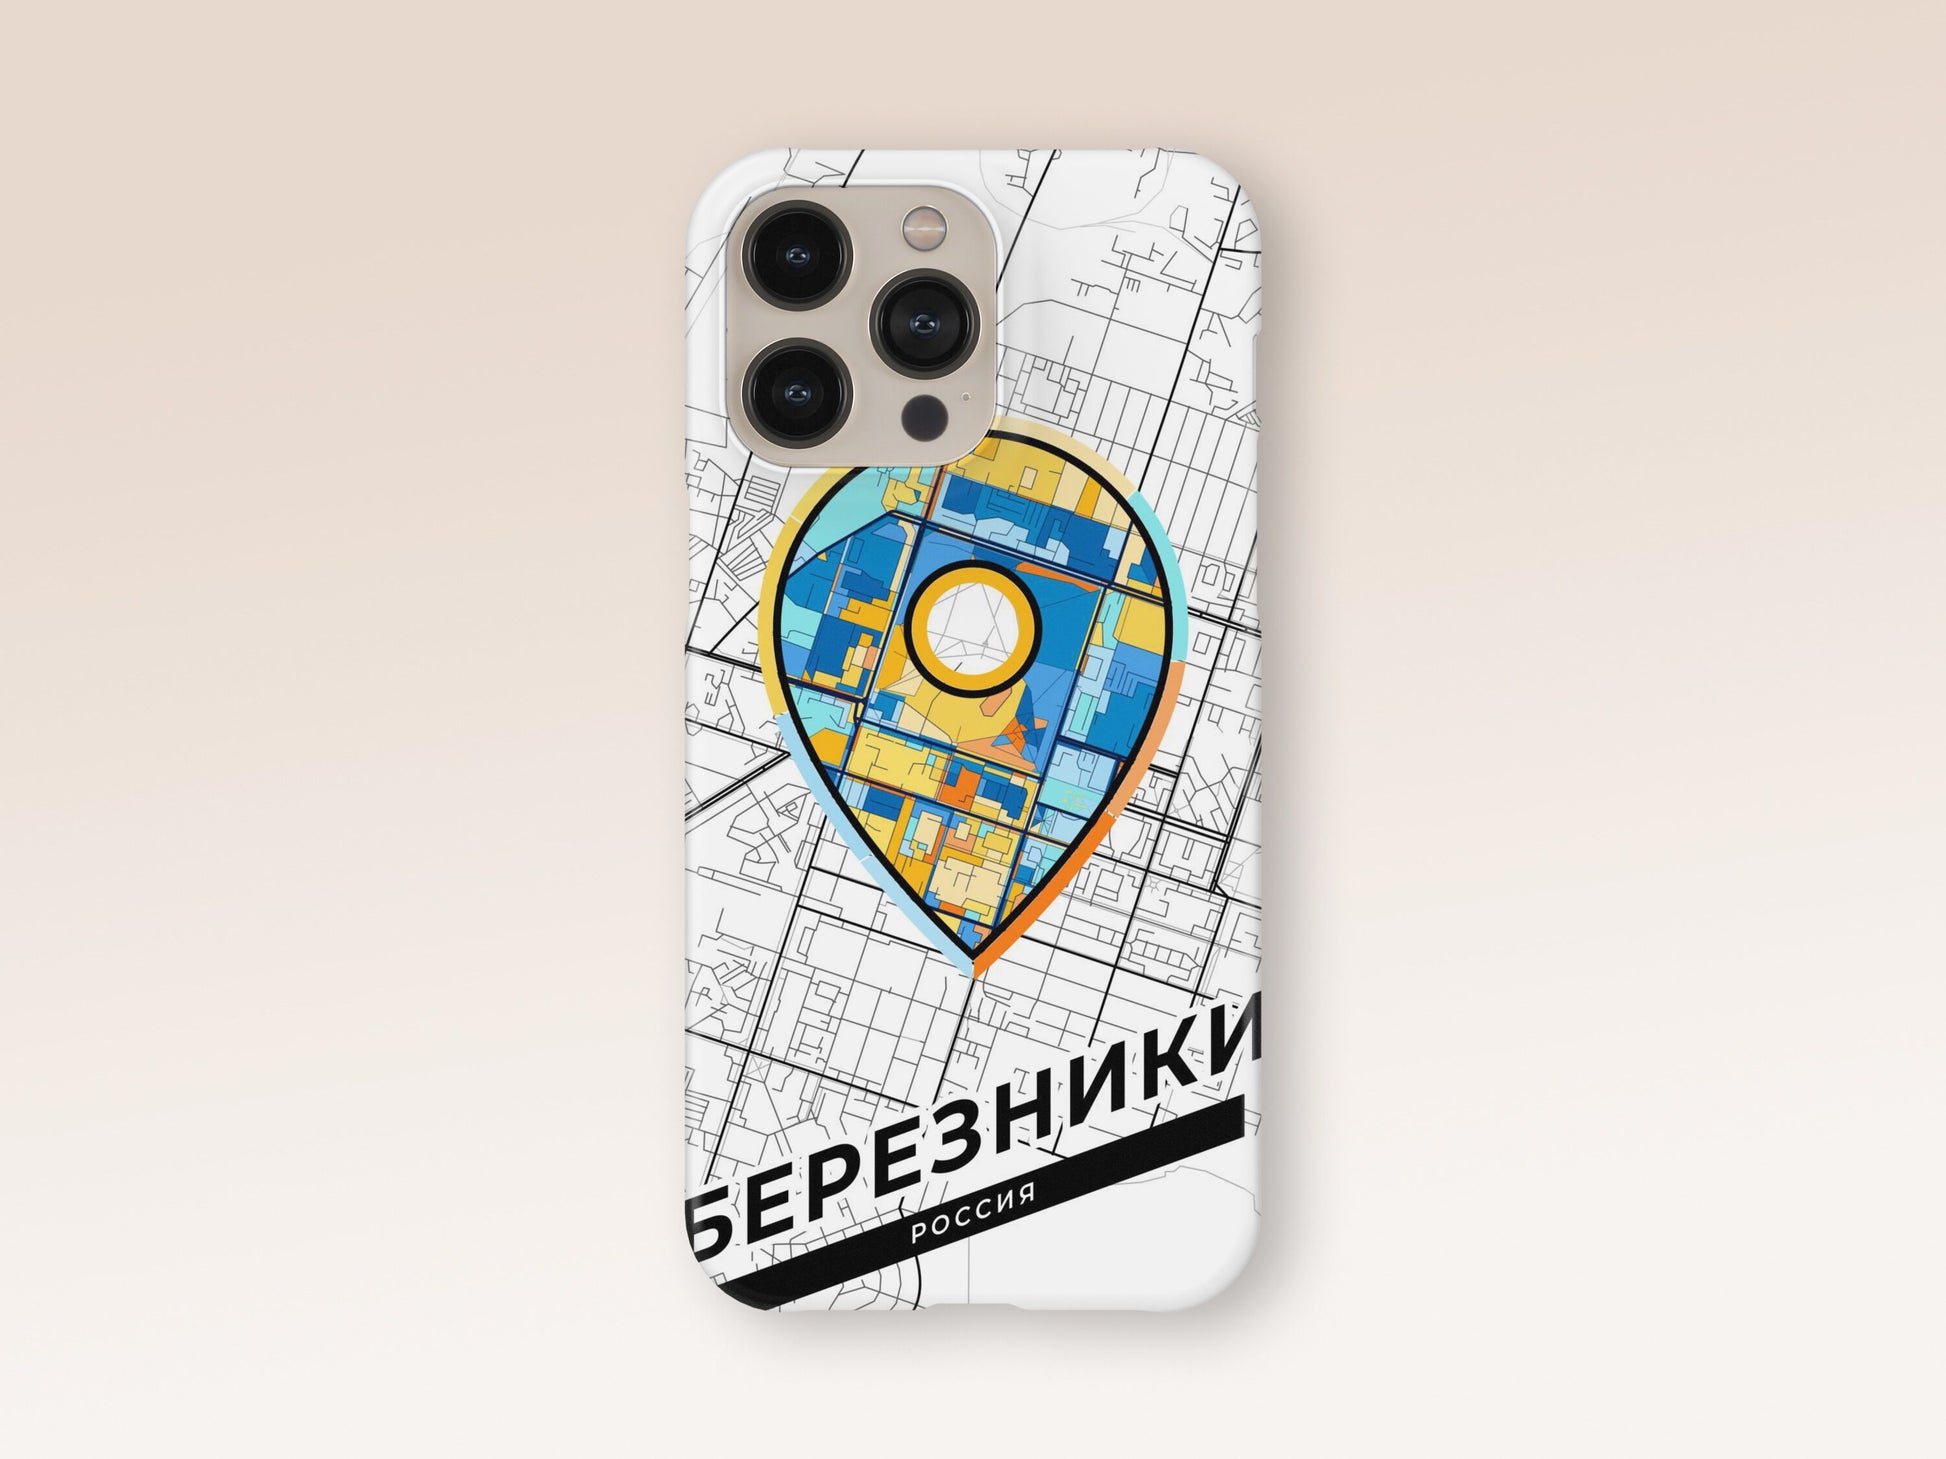 Berezniki Russia slim phone case with colorful icon. Birthday, wedding or housewarming gift. Couple match cases. 1